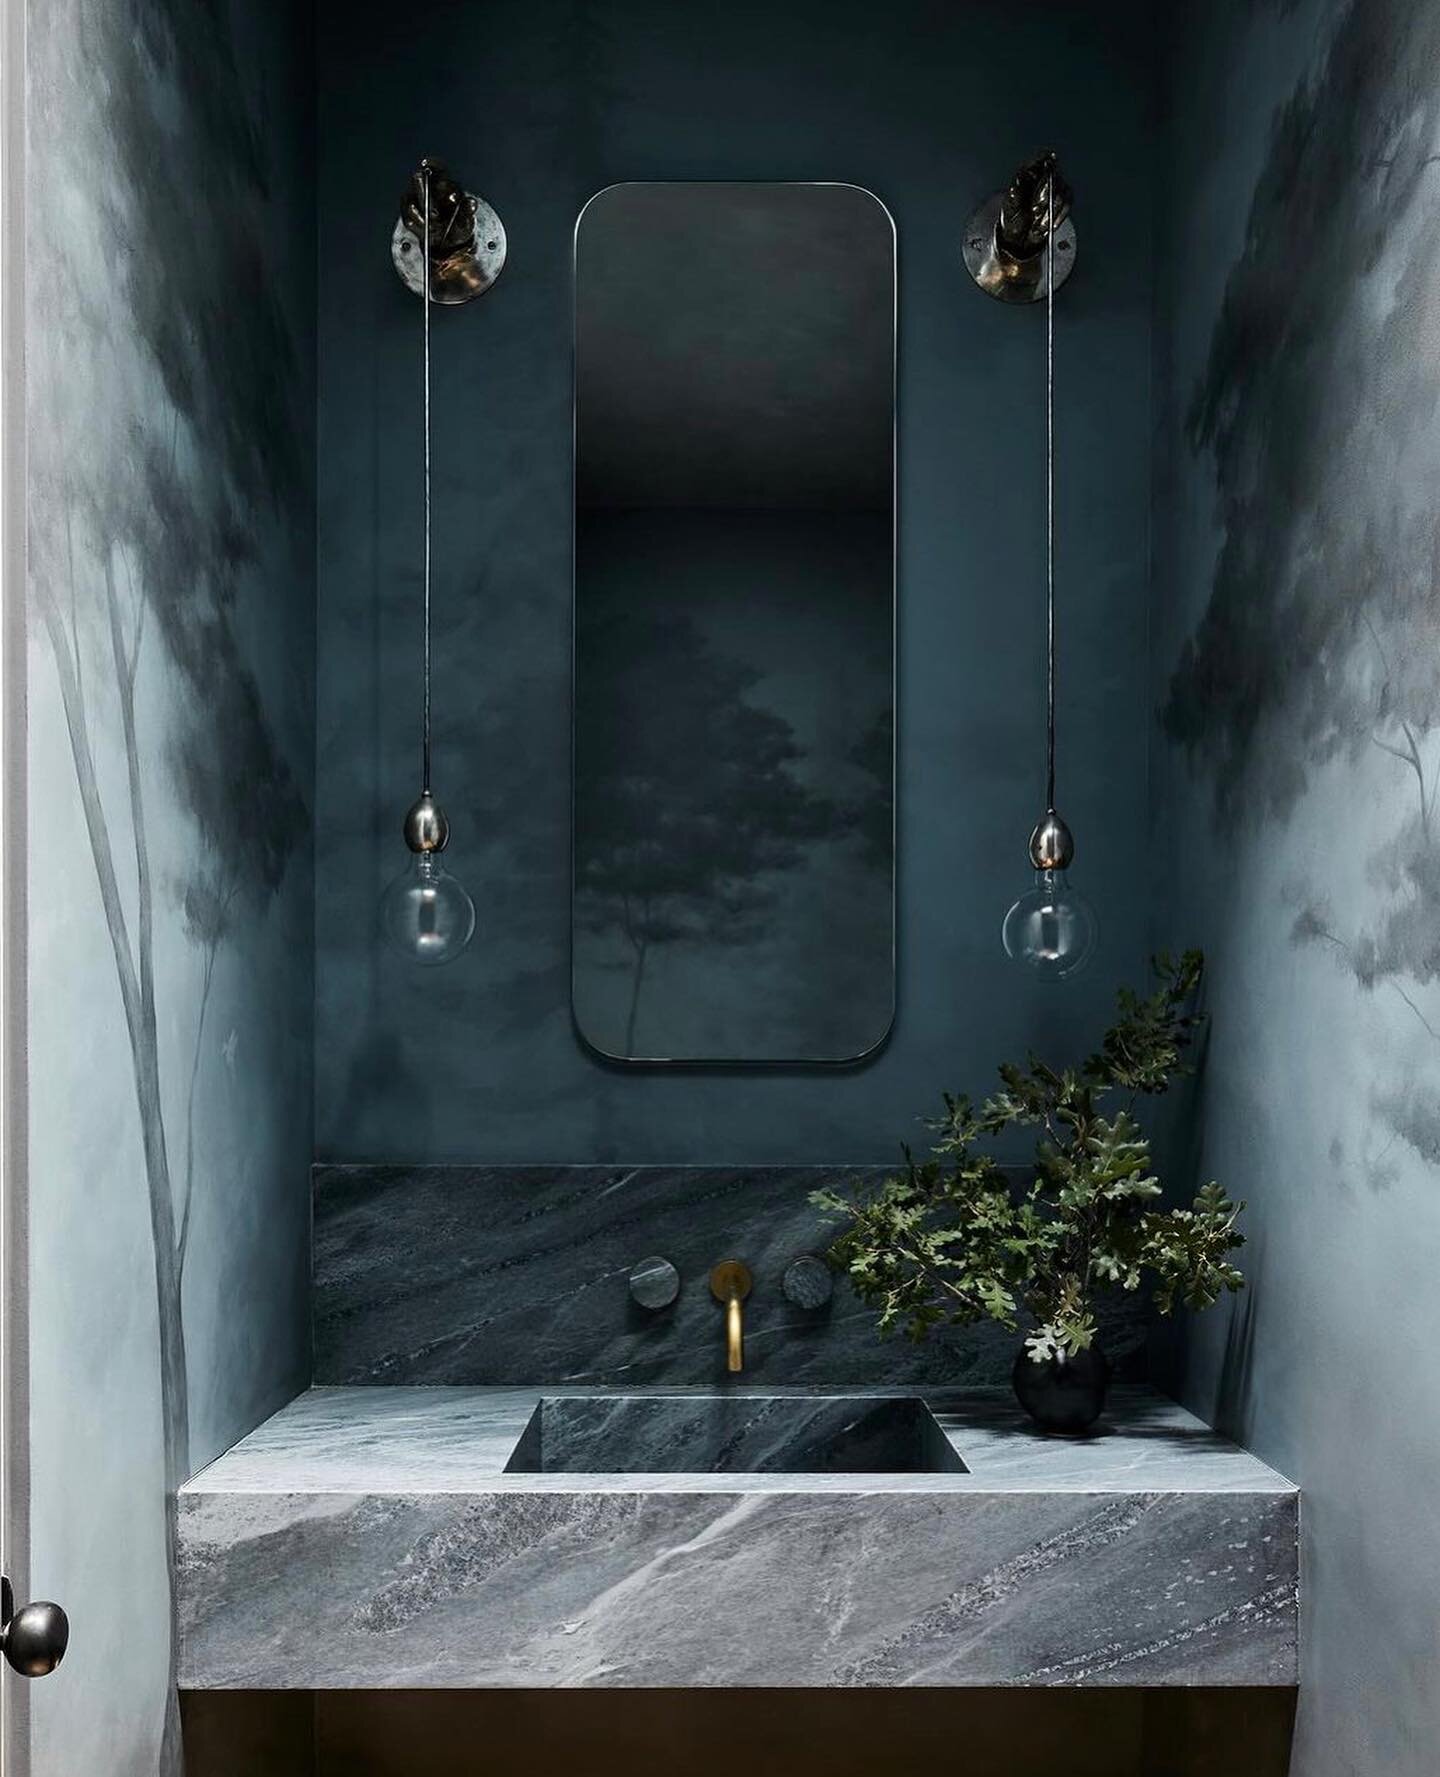 Taking inspiration from @lindsaygerberinteriors moody powder bath design. Enveloped in a dreamy forest mural by @caroline_lizarraga and contrasted with subtle accents of brass. 

Photography: @nicole_franzen 
Builder: @trainorbuilders 
.
.
.
.
.
.
.
